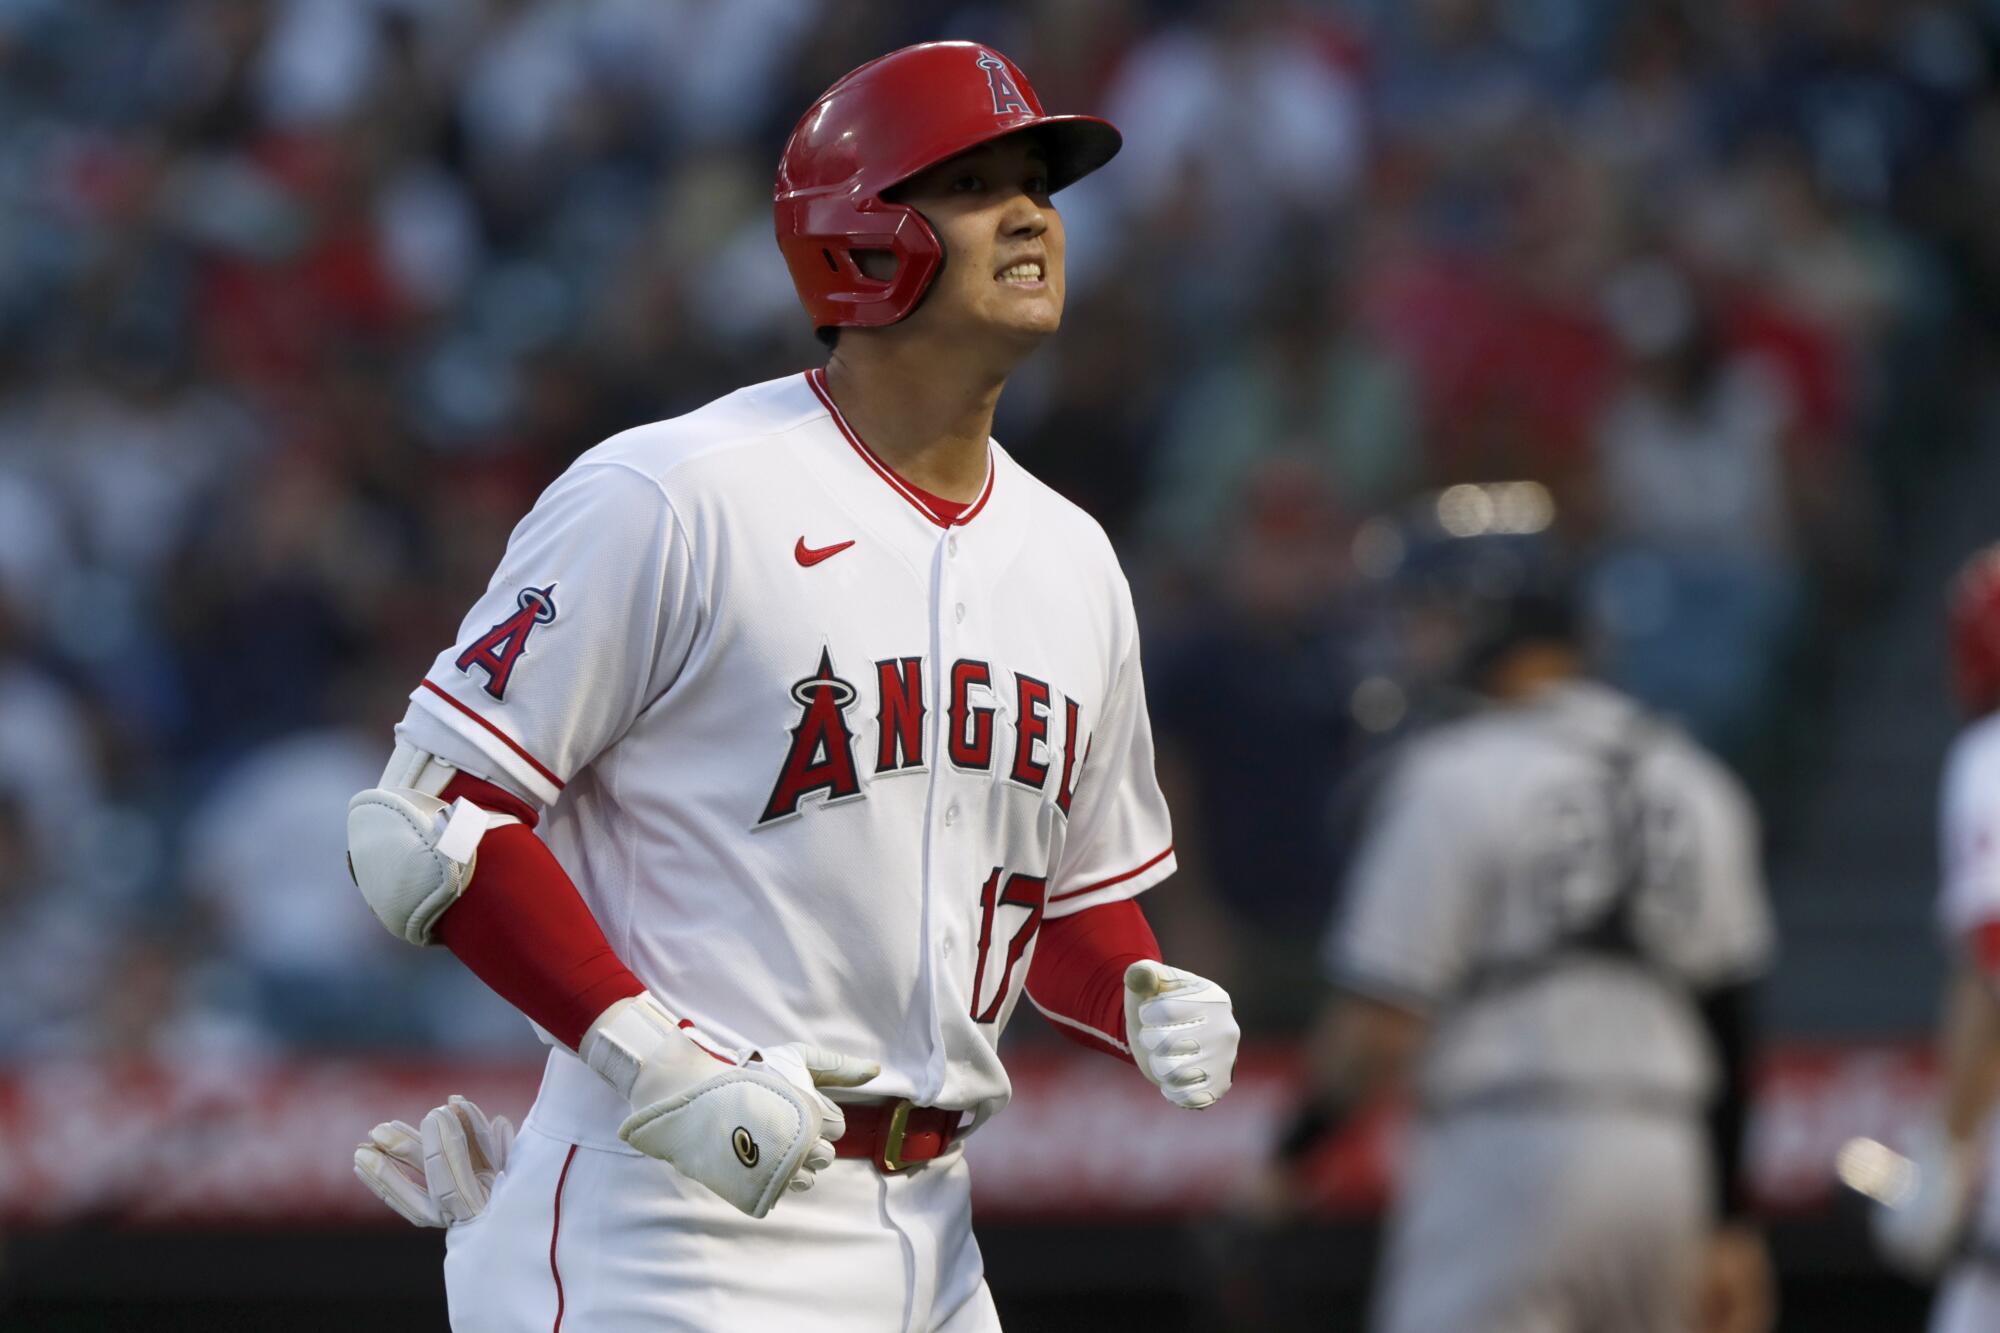 Shohei Ohtani chose No. 17, but joked that he wanted to wear Mike Trout's  number